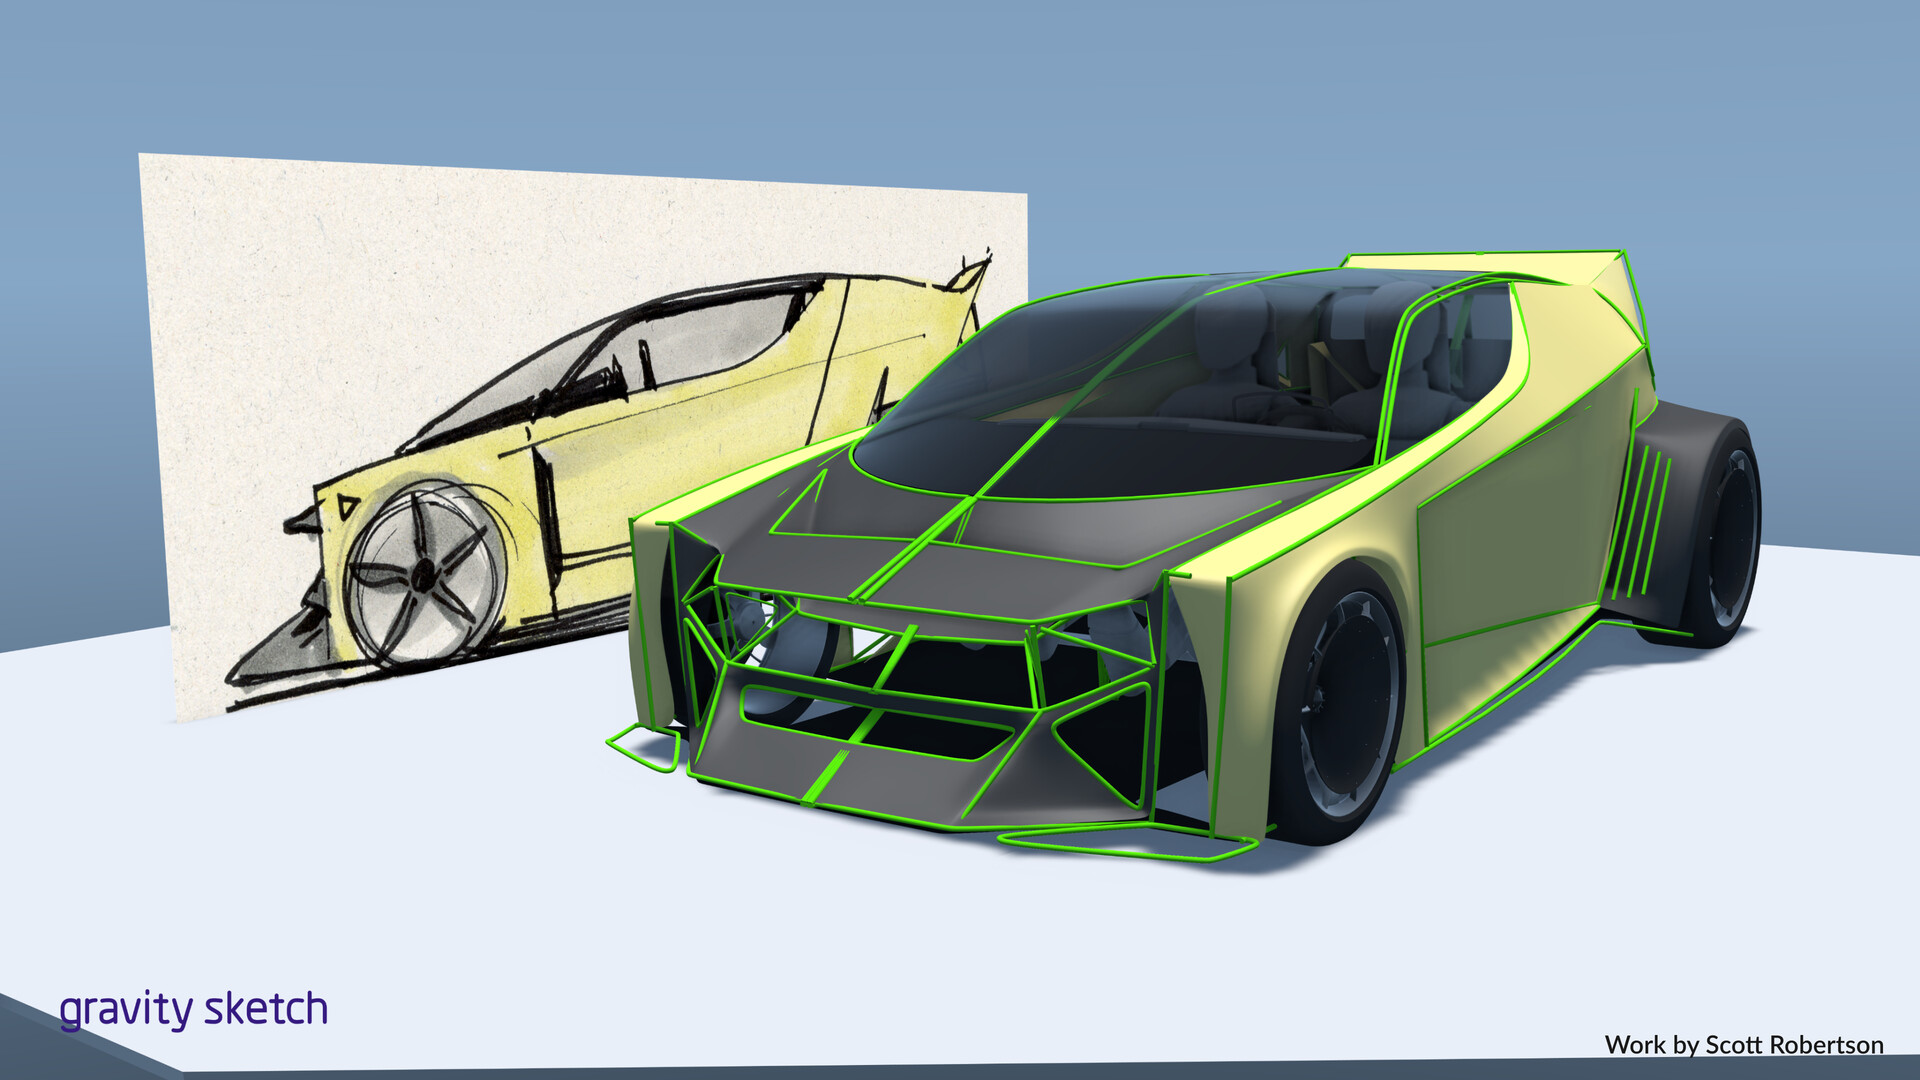 Car designers explore working with virtual reality